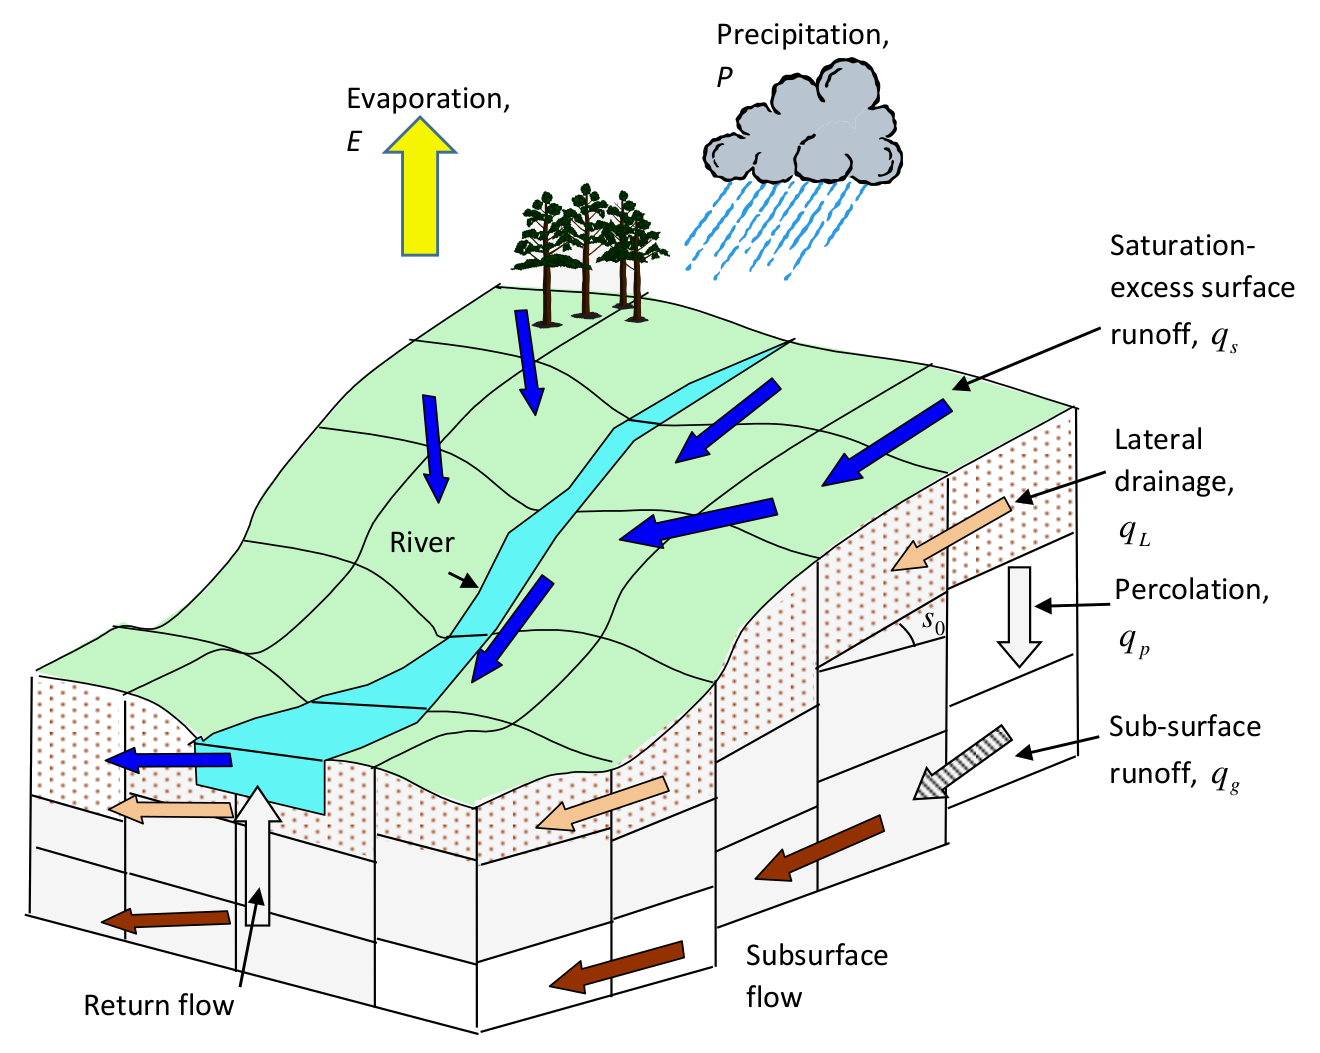 Schematic of the Grid-to-Grid national scale hydrological model.